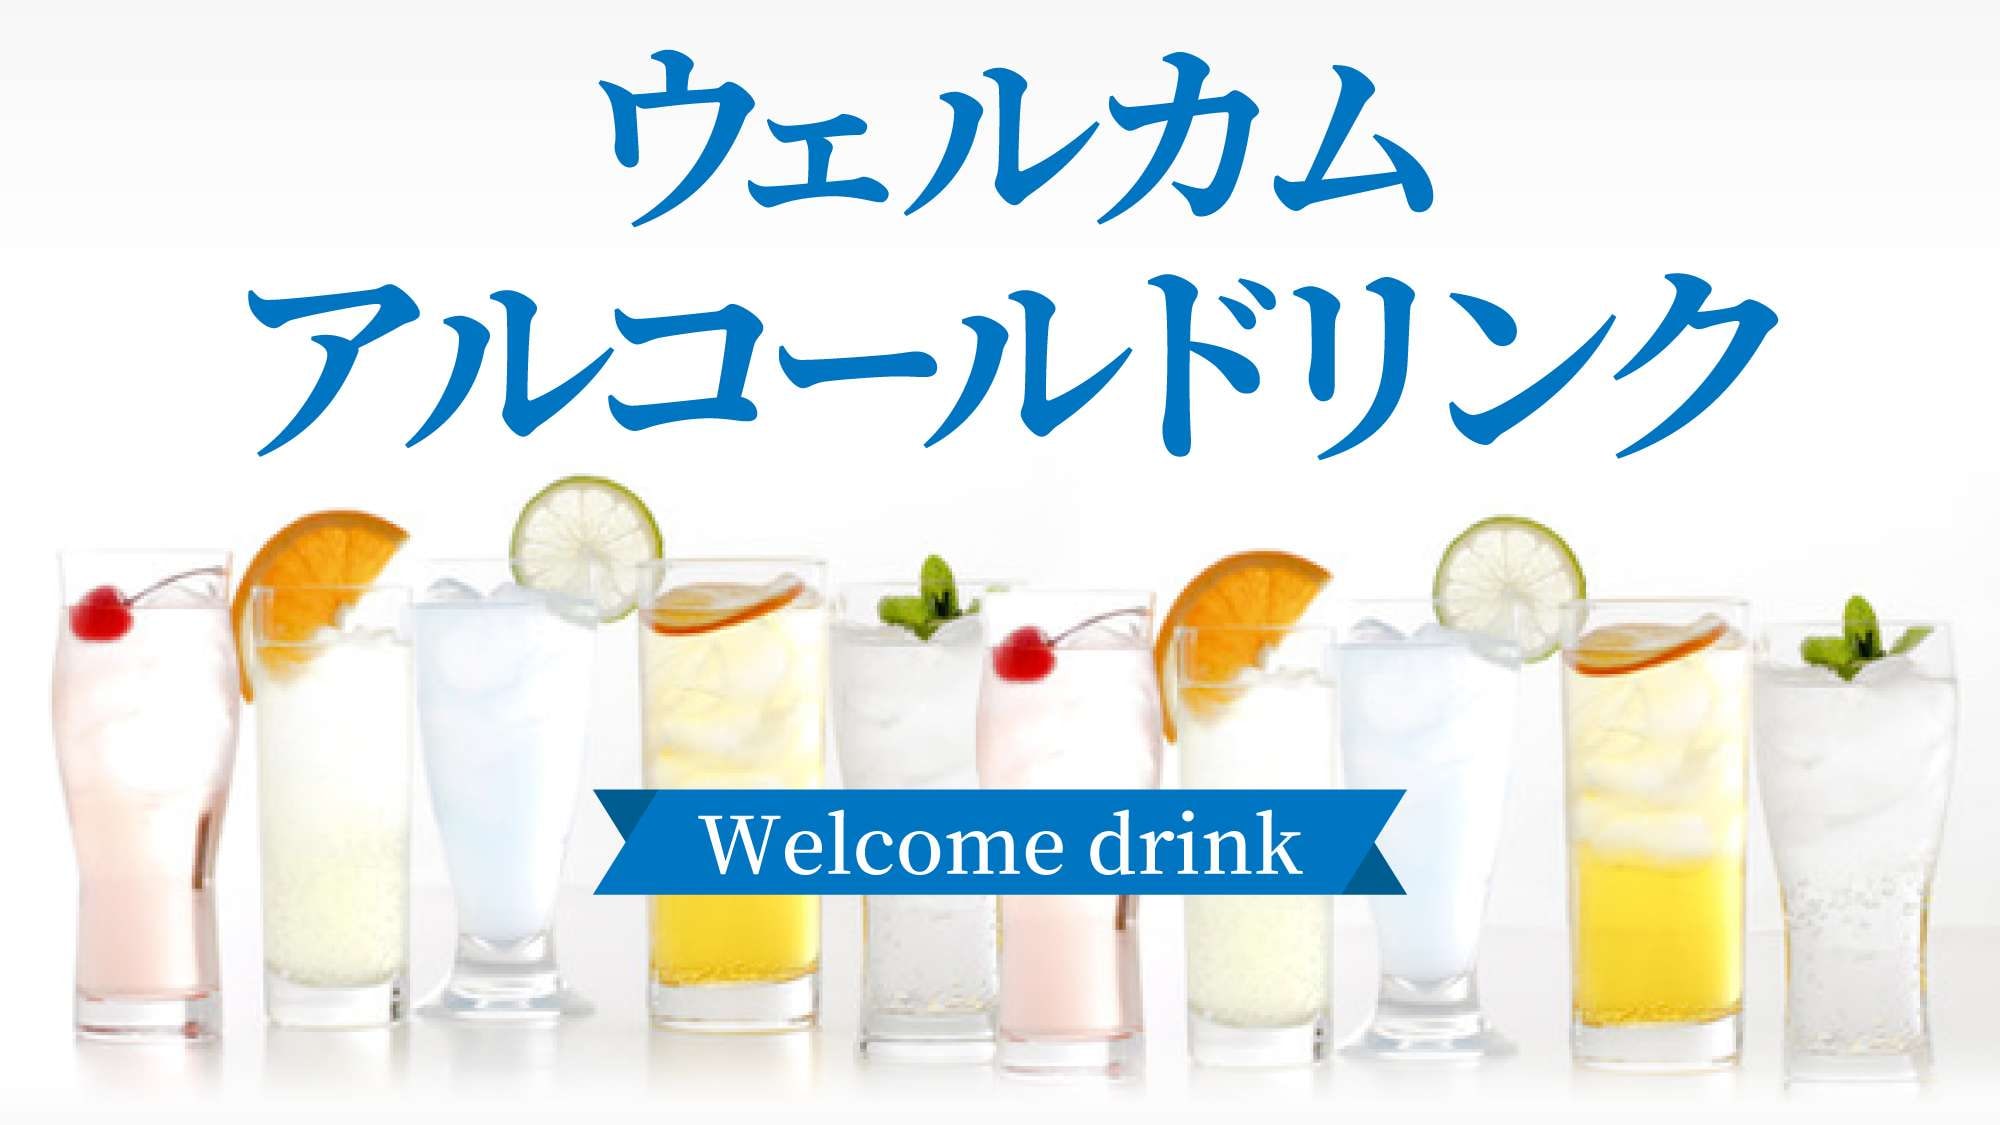 Welcome drink service